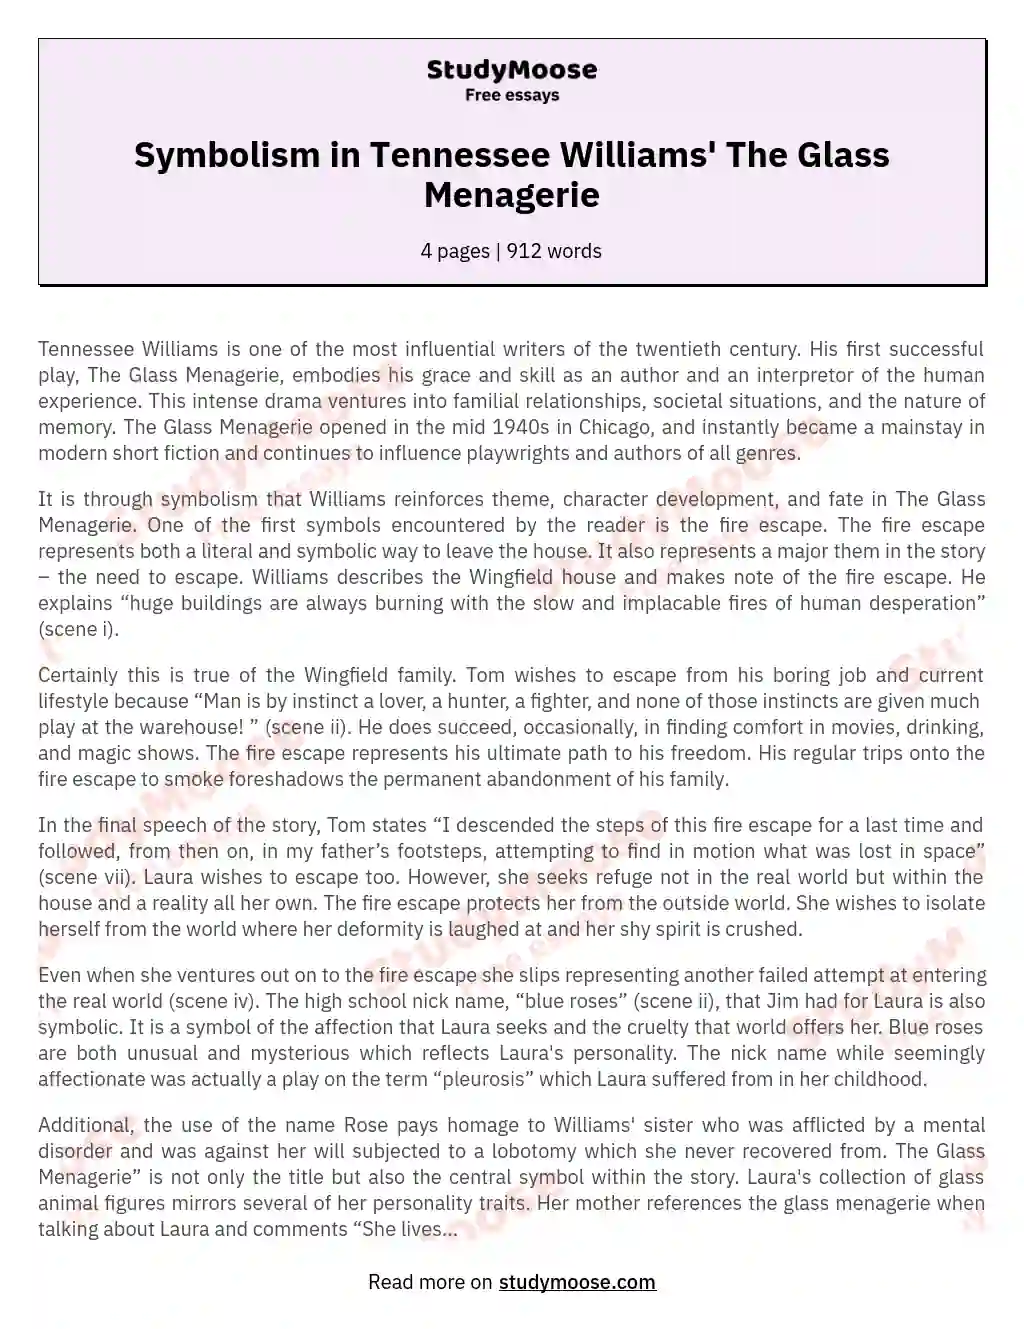 Symbolism in Tennessee Williams' The Glass Menagerie